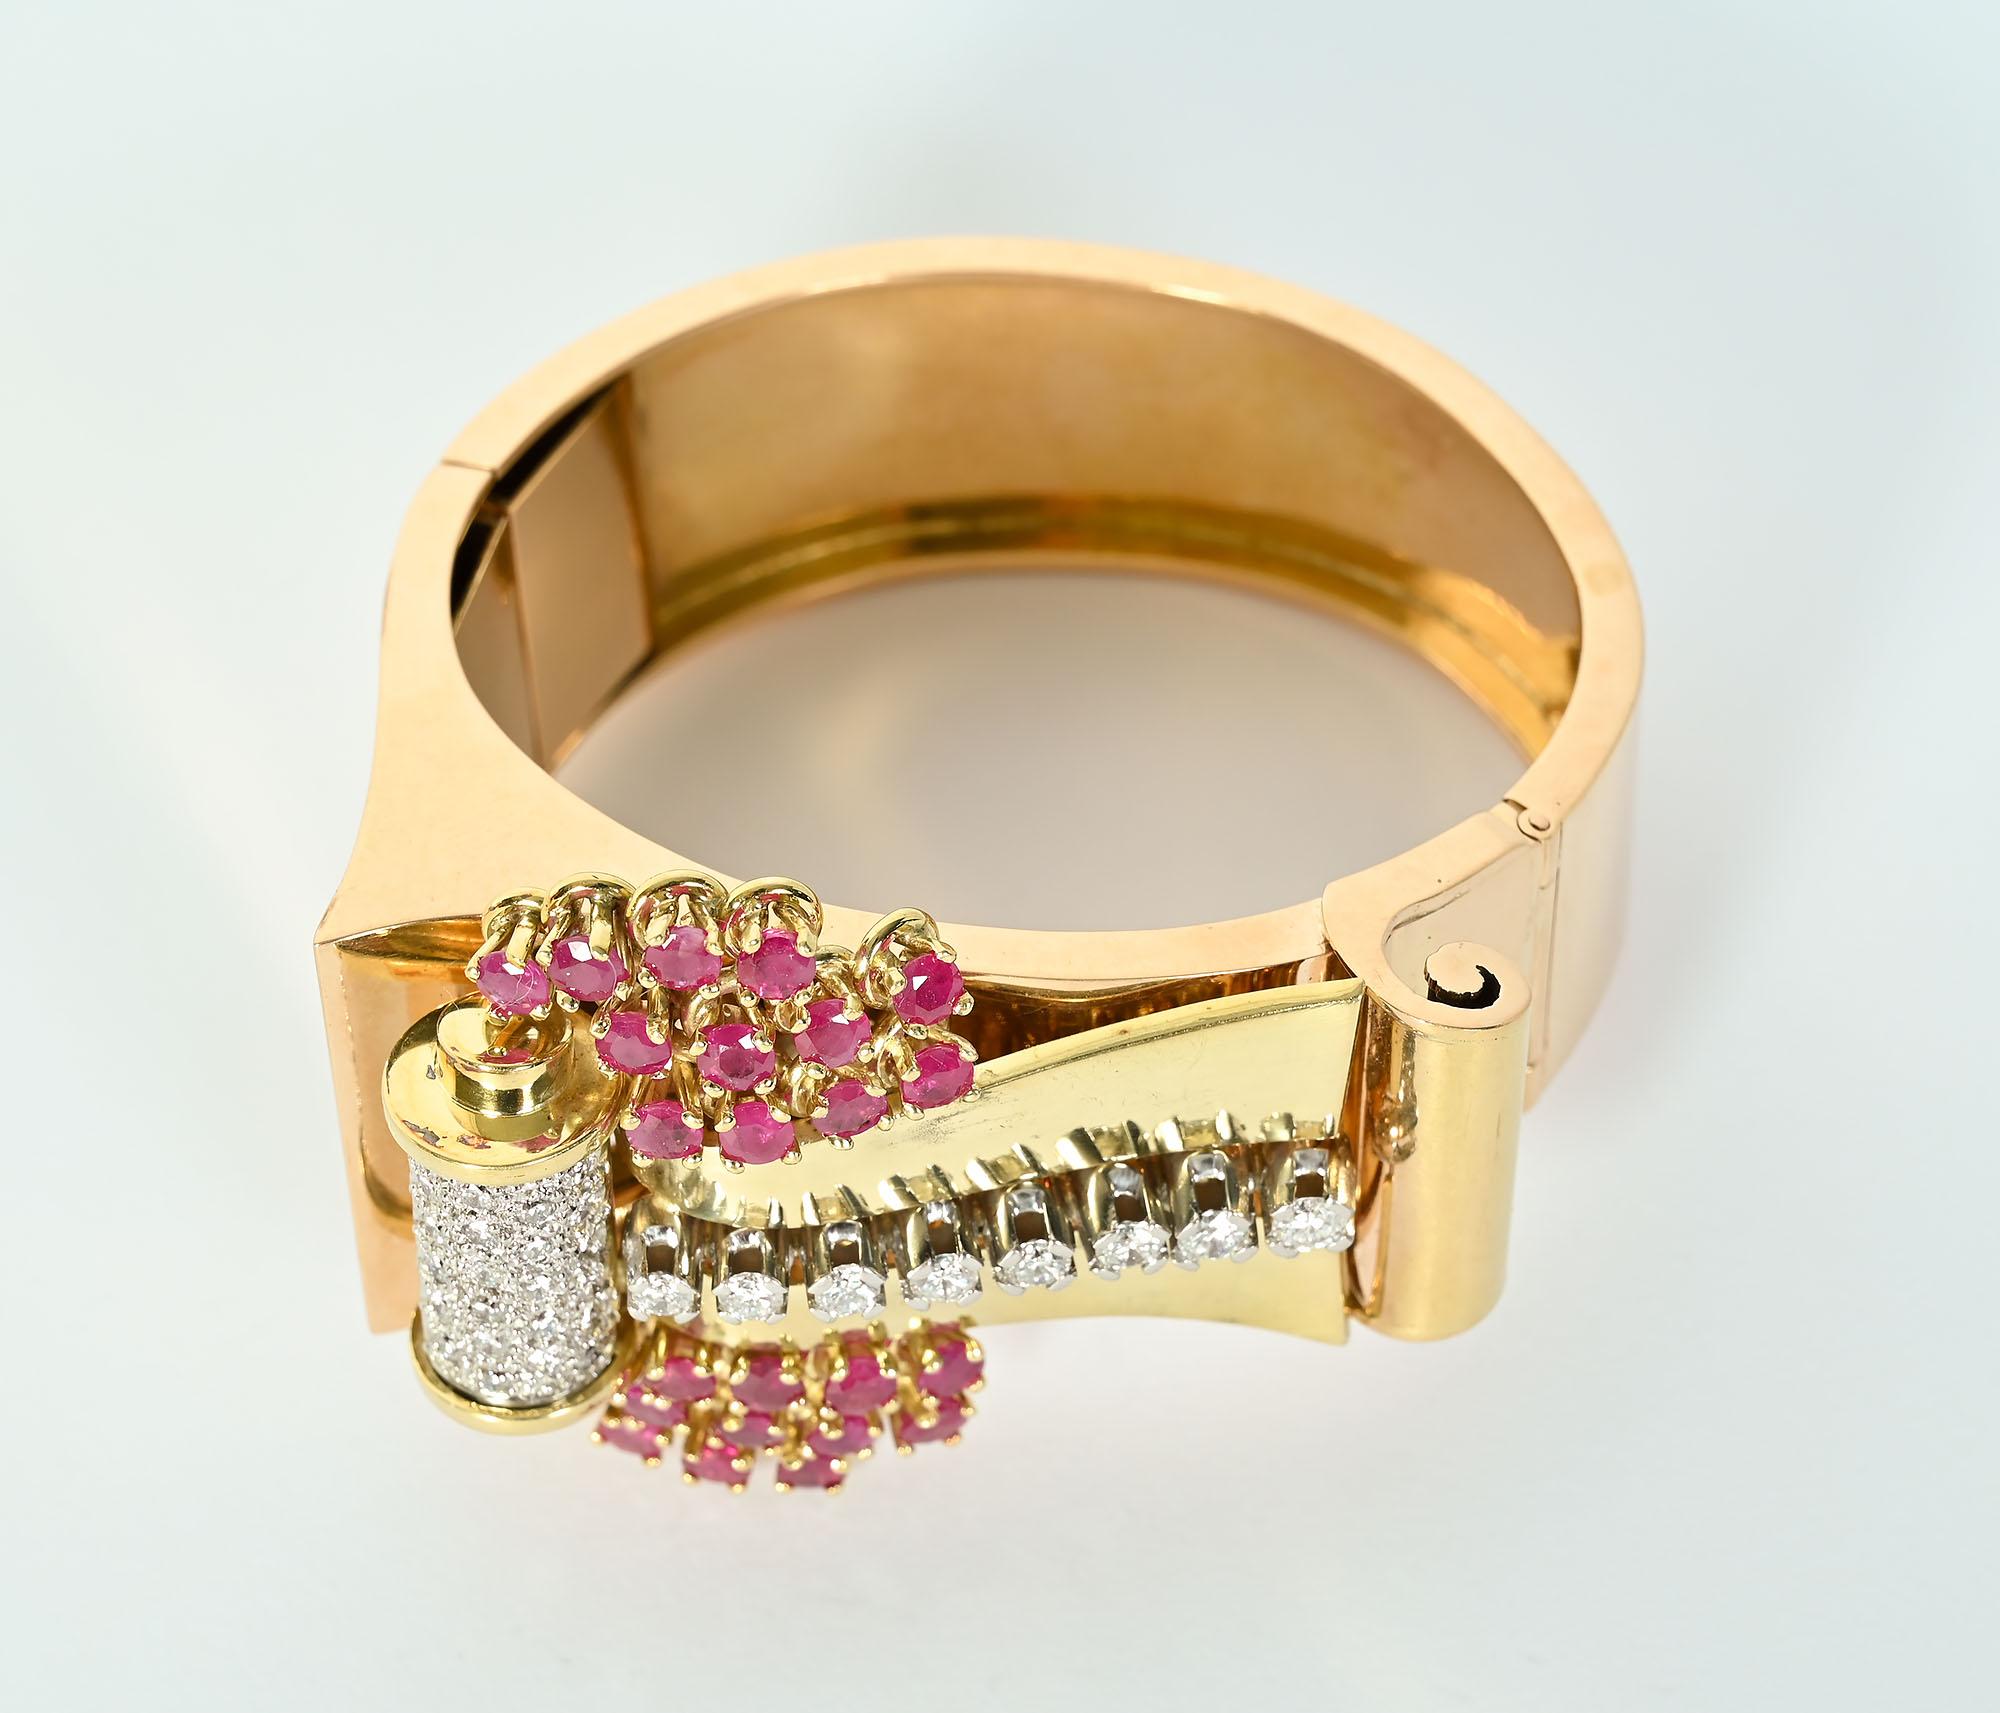 Stupendous would not be too strong a superlative to describe this  14 karat gold Retro bracelet with rubies and diamonds. In addition to being an imposing bracelet, it can be separated into a brooch as well, It has 2.13 carats of round brilliant cut